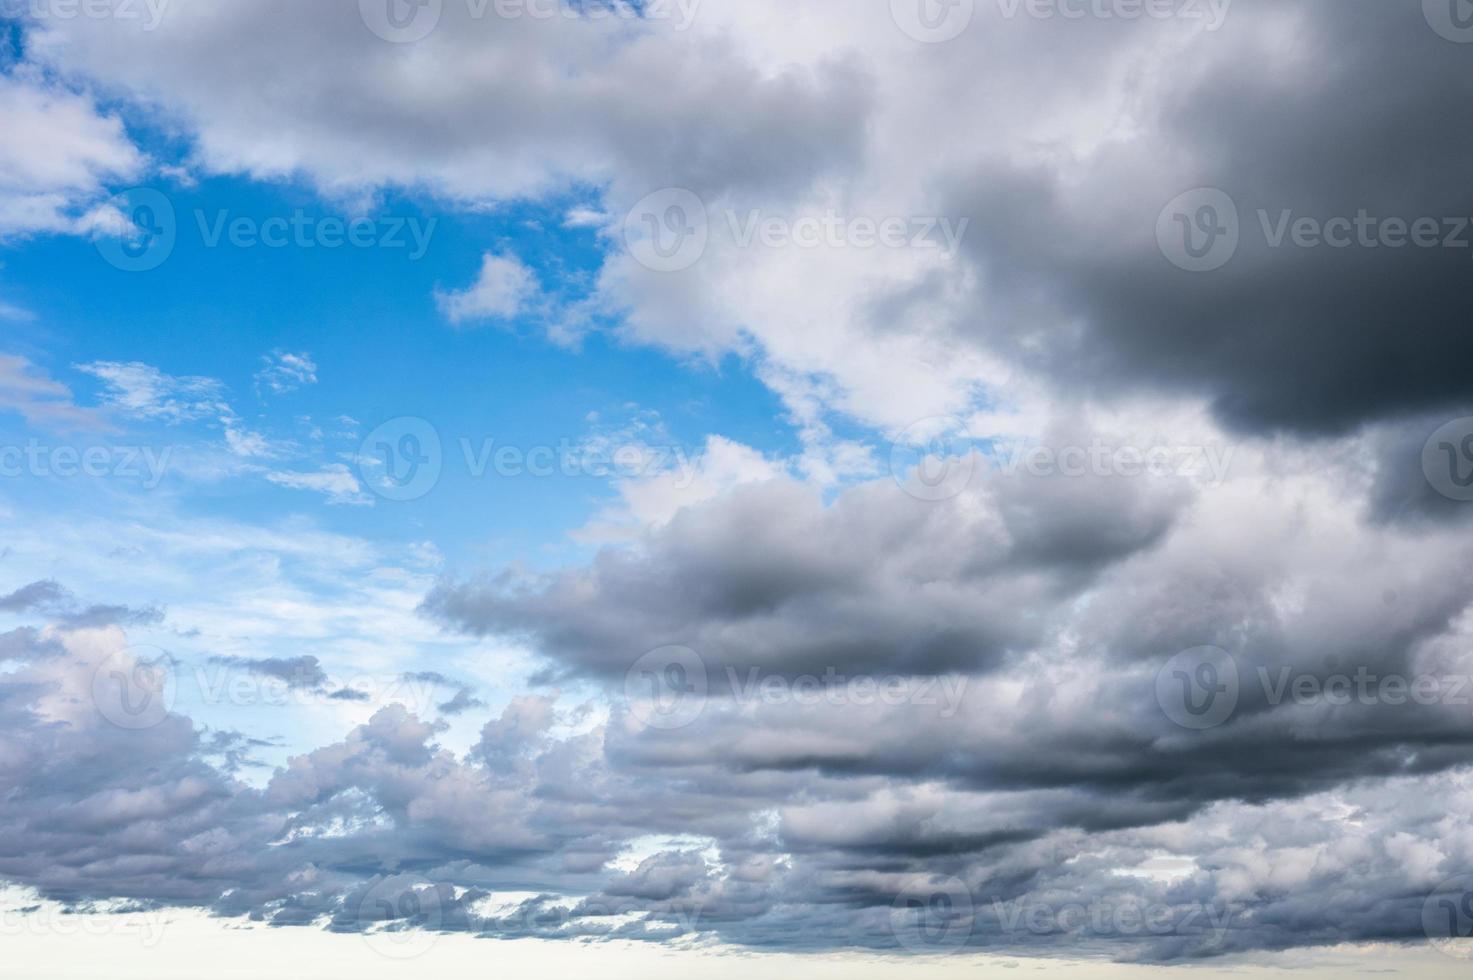 Storm clouds blowing in blue sky photo